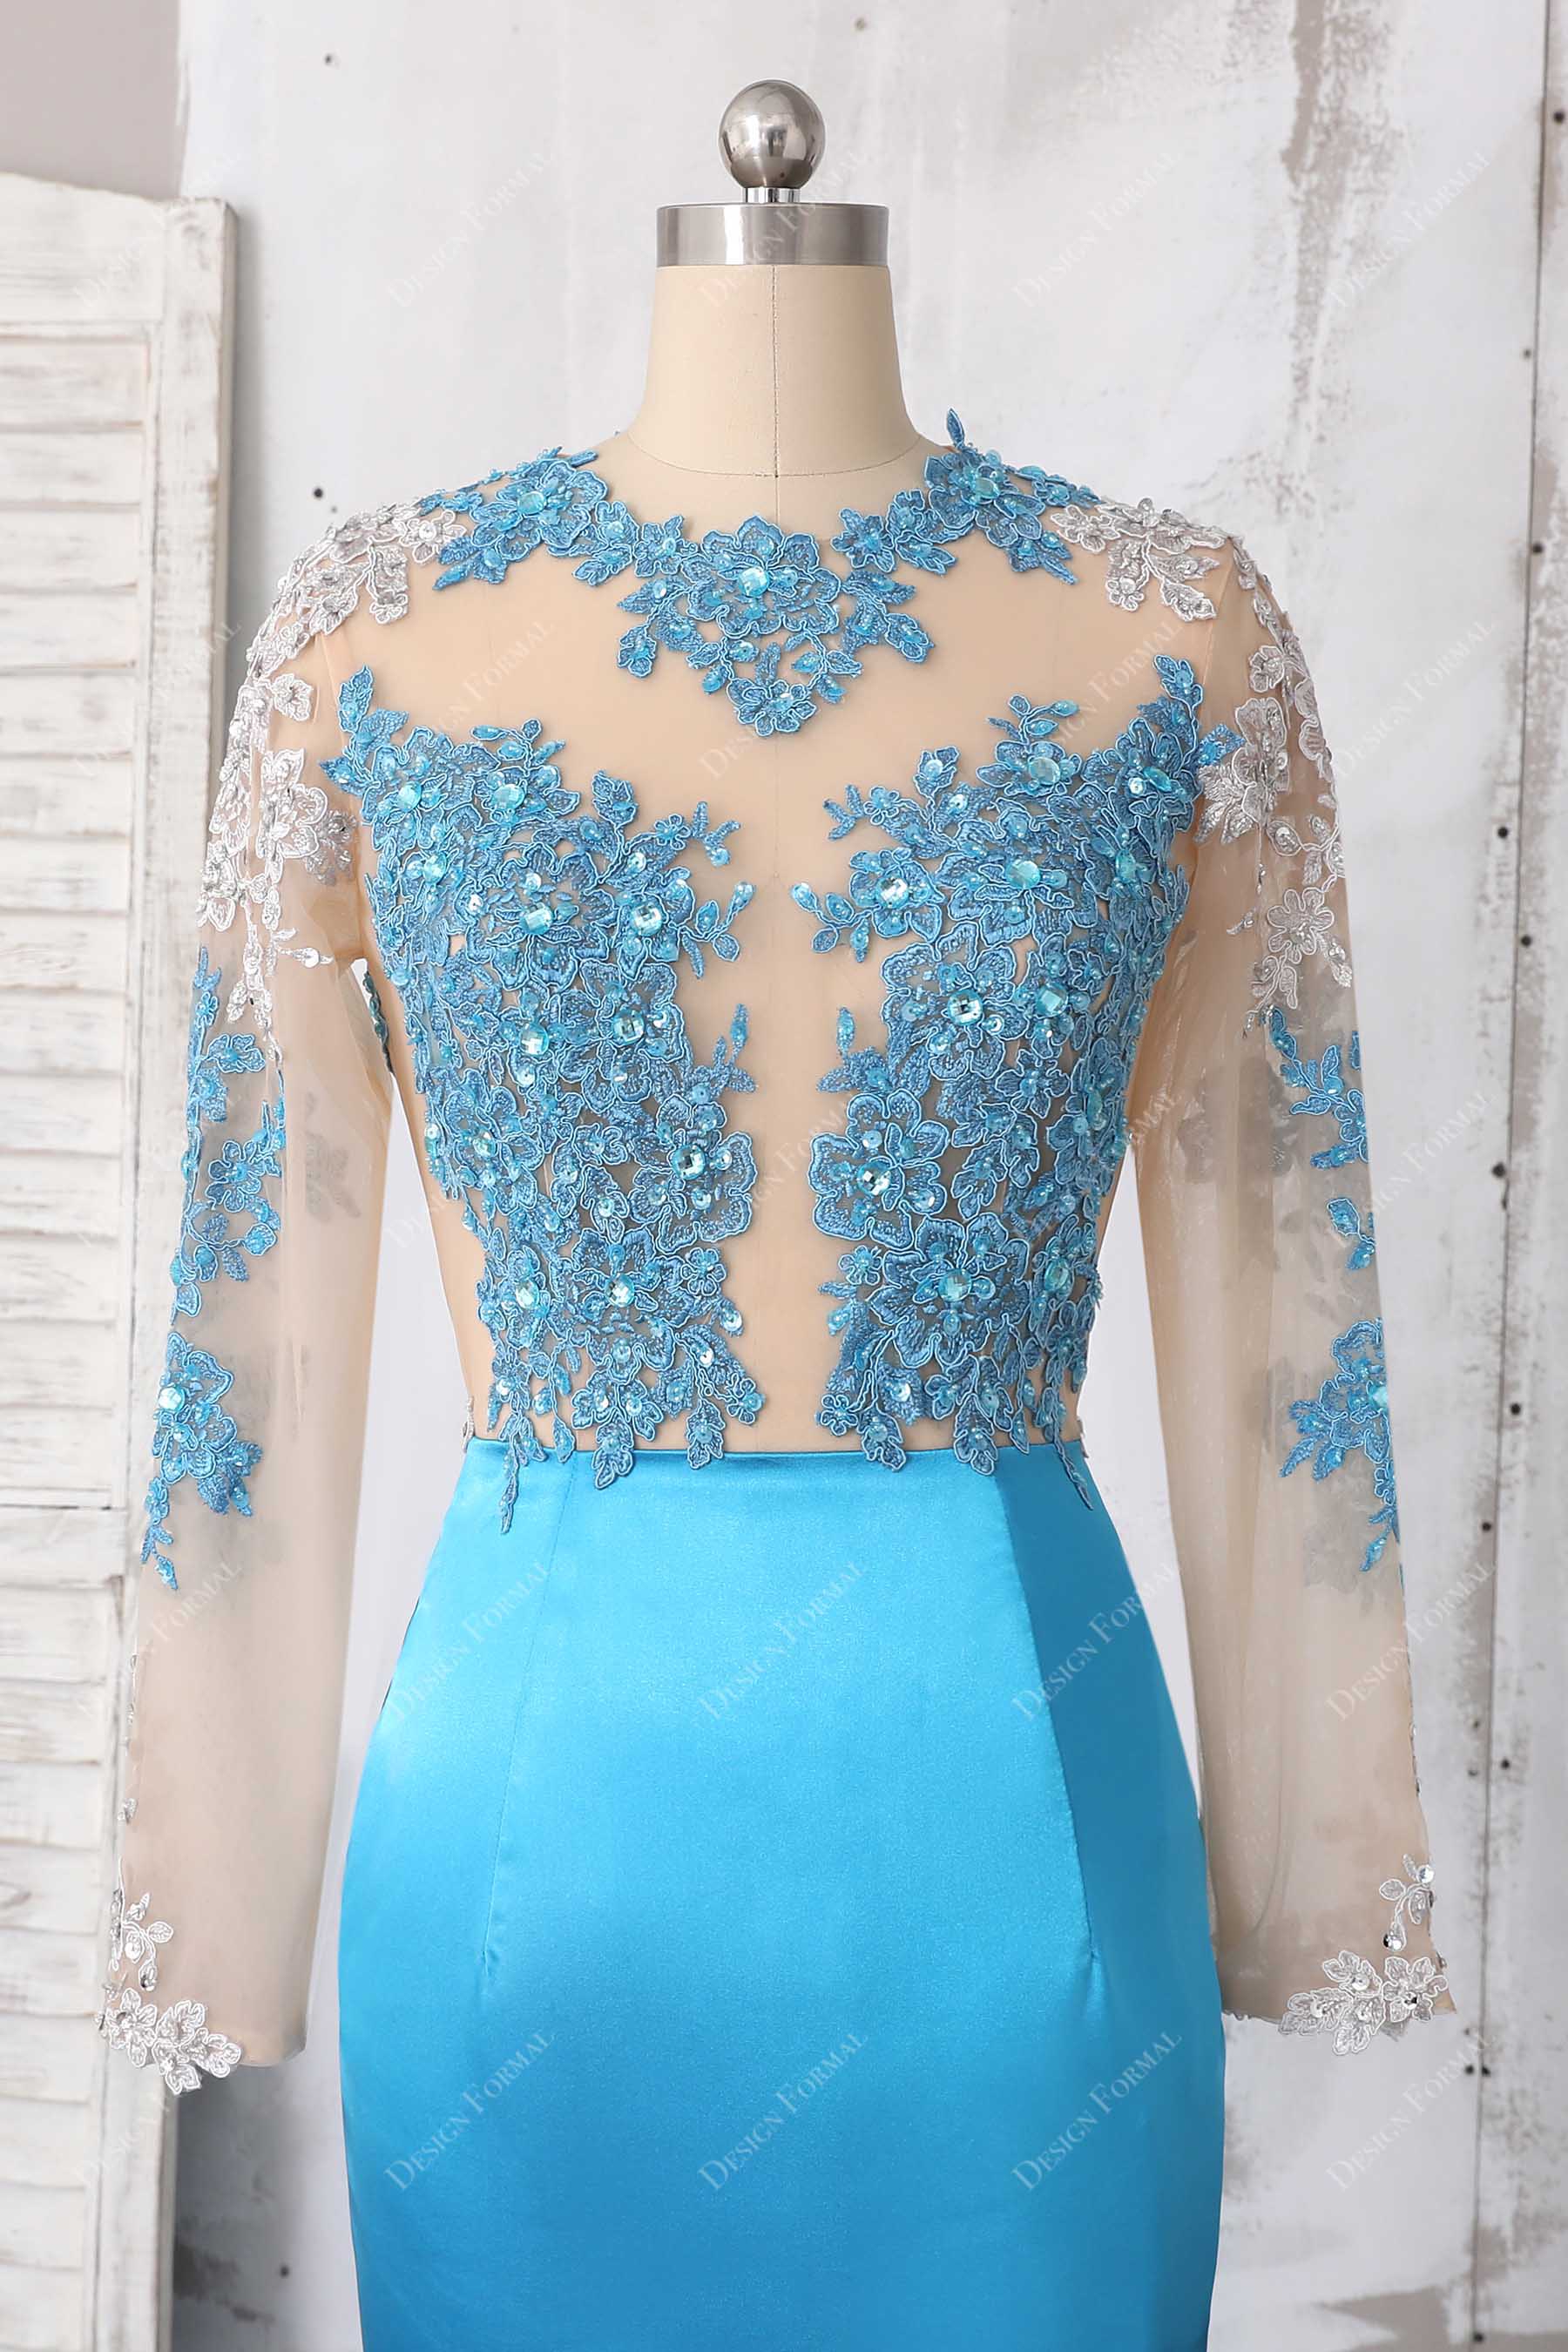 sheer bodice pool blue beaded appliques